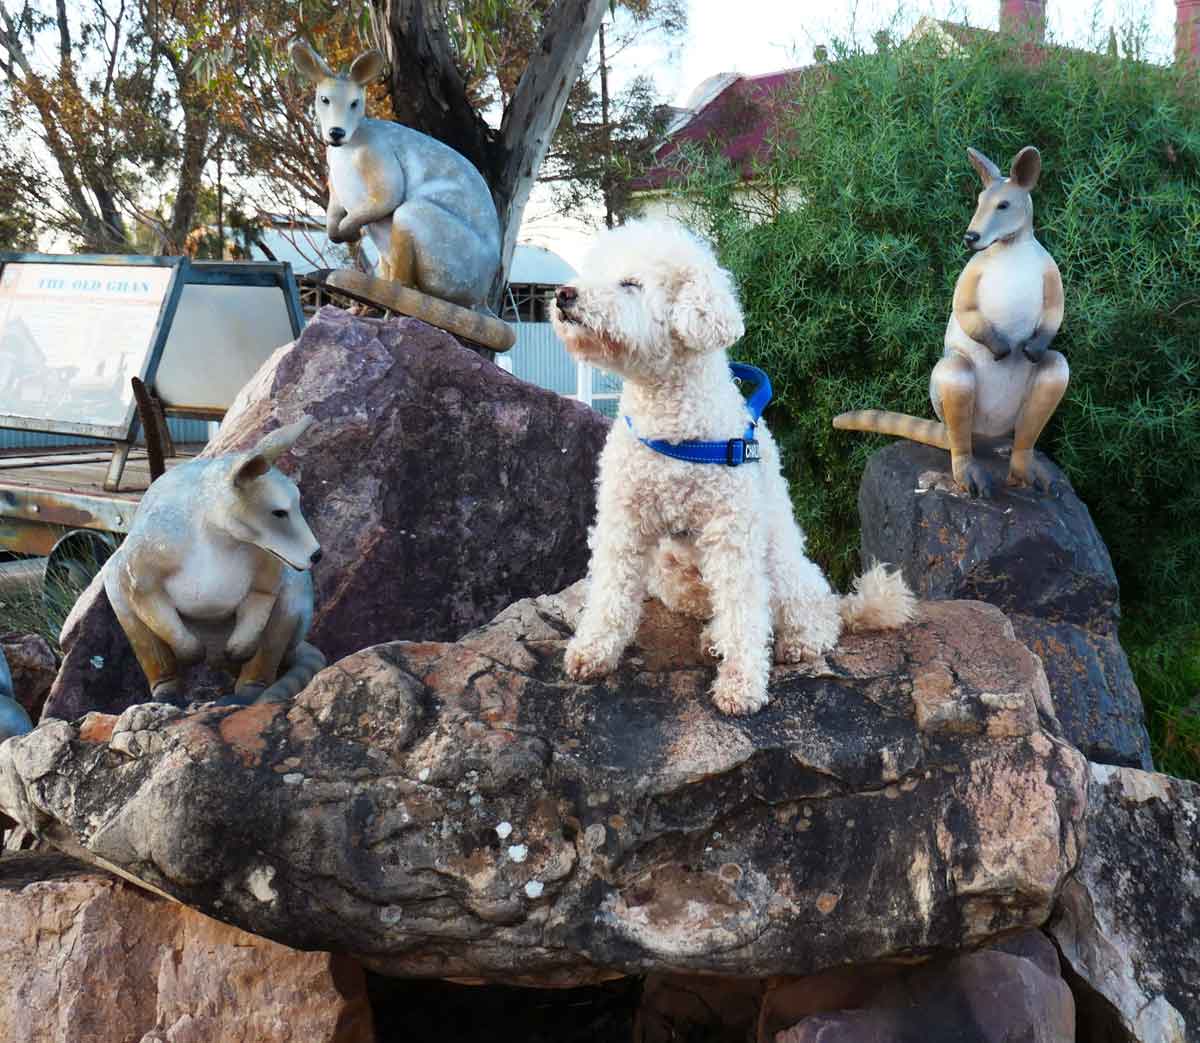 Travel with your dog to Quorn in the southern Flinders Ranges